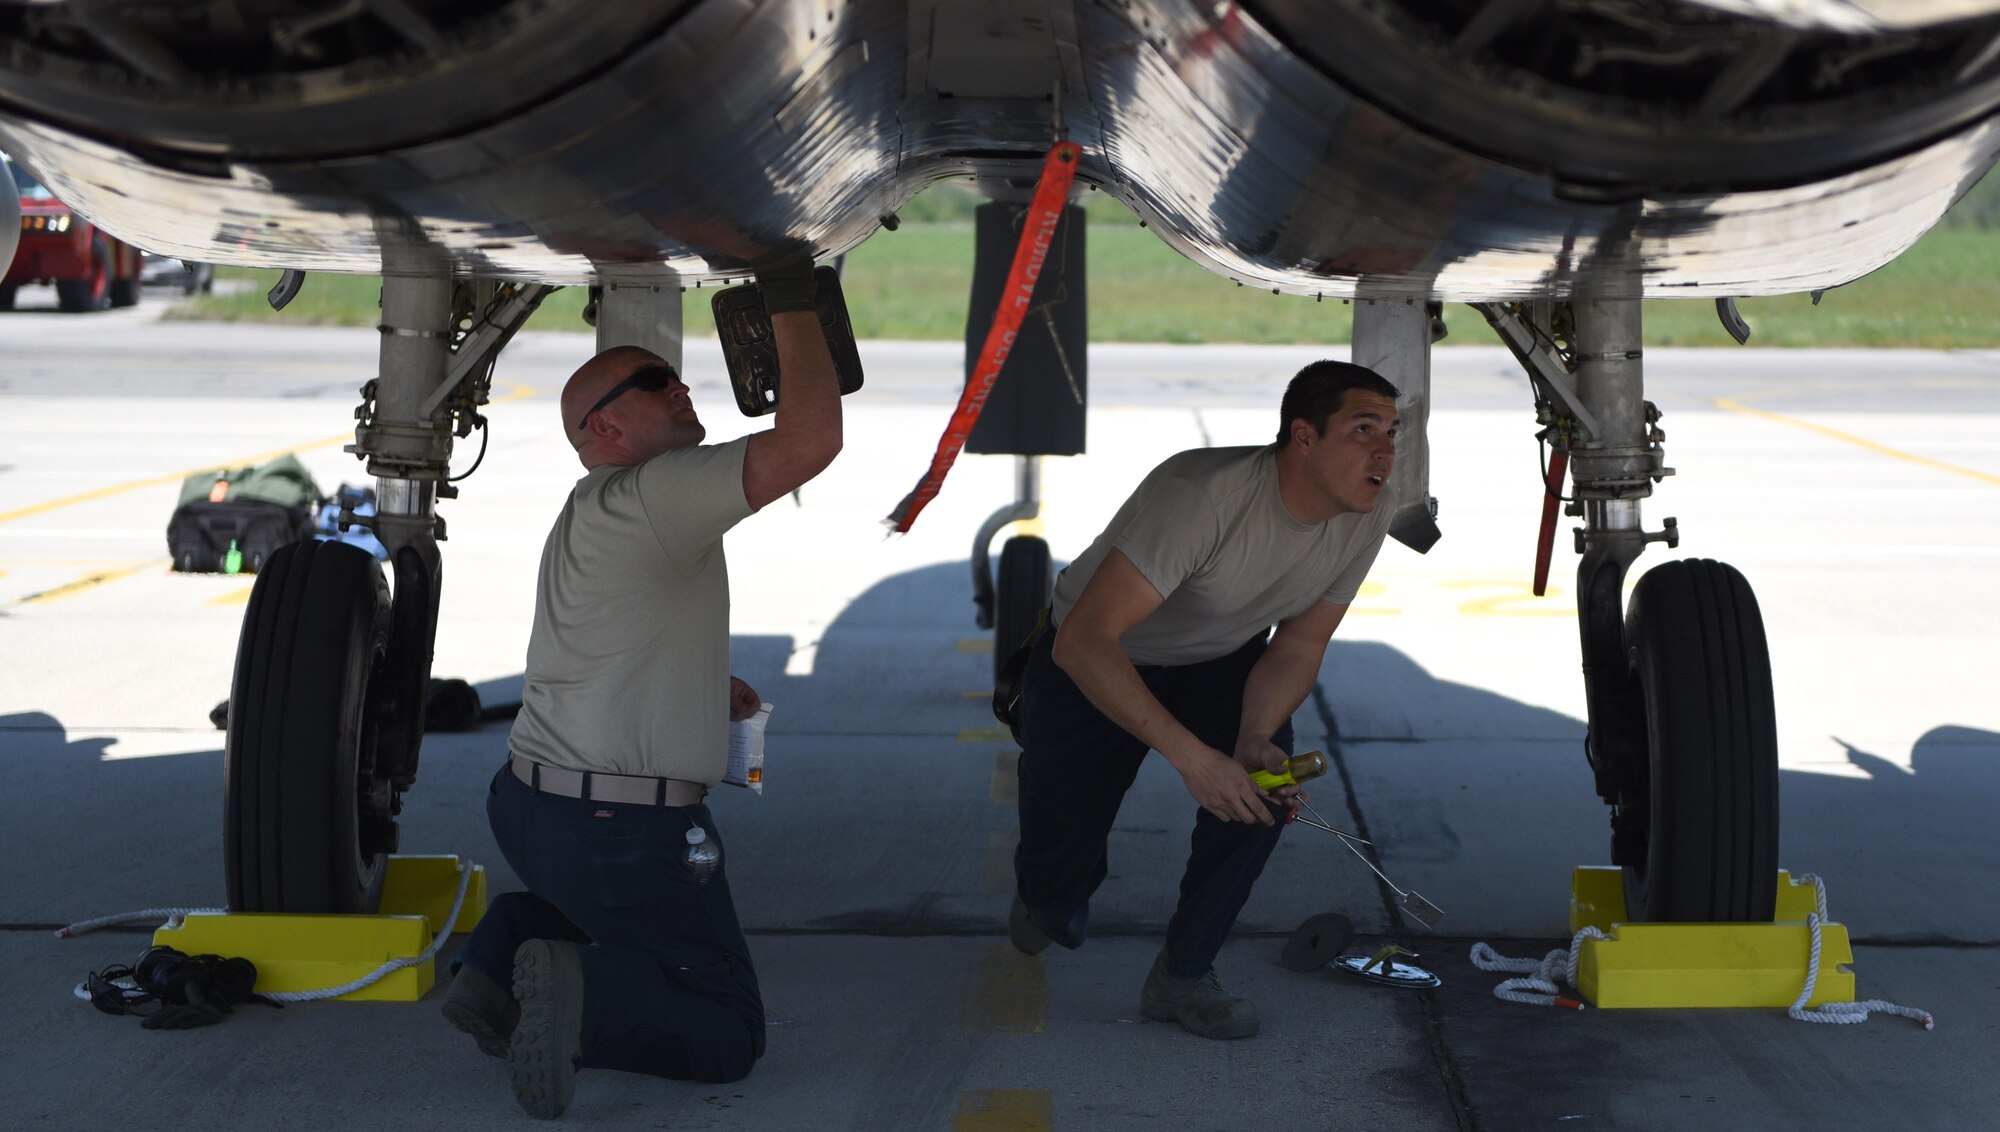 Airmen from the 122nd Expeditionary Fighter Squadron perform maintenance at Graf Ignatievo Air Base, Bulgaria, April 26, 2017. F-15Cs from the Louisiana and Florida Air National Guard are deployed to Europe to participate in a Theater Security Package. These F-15s will conduct training alongside NATO allies to strengthen interoperability and to demonstrate U.S. commitment to the security and stability of Europe. (U.S. Air Force photo by Tech. Sgt. Staci Miller)